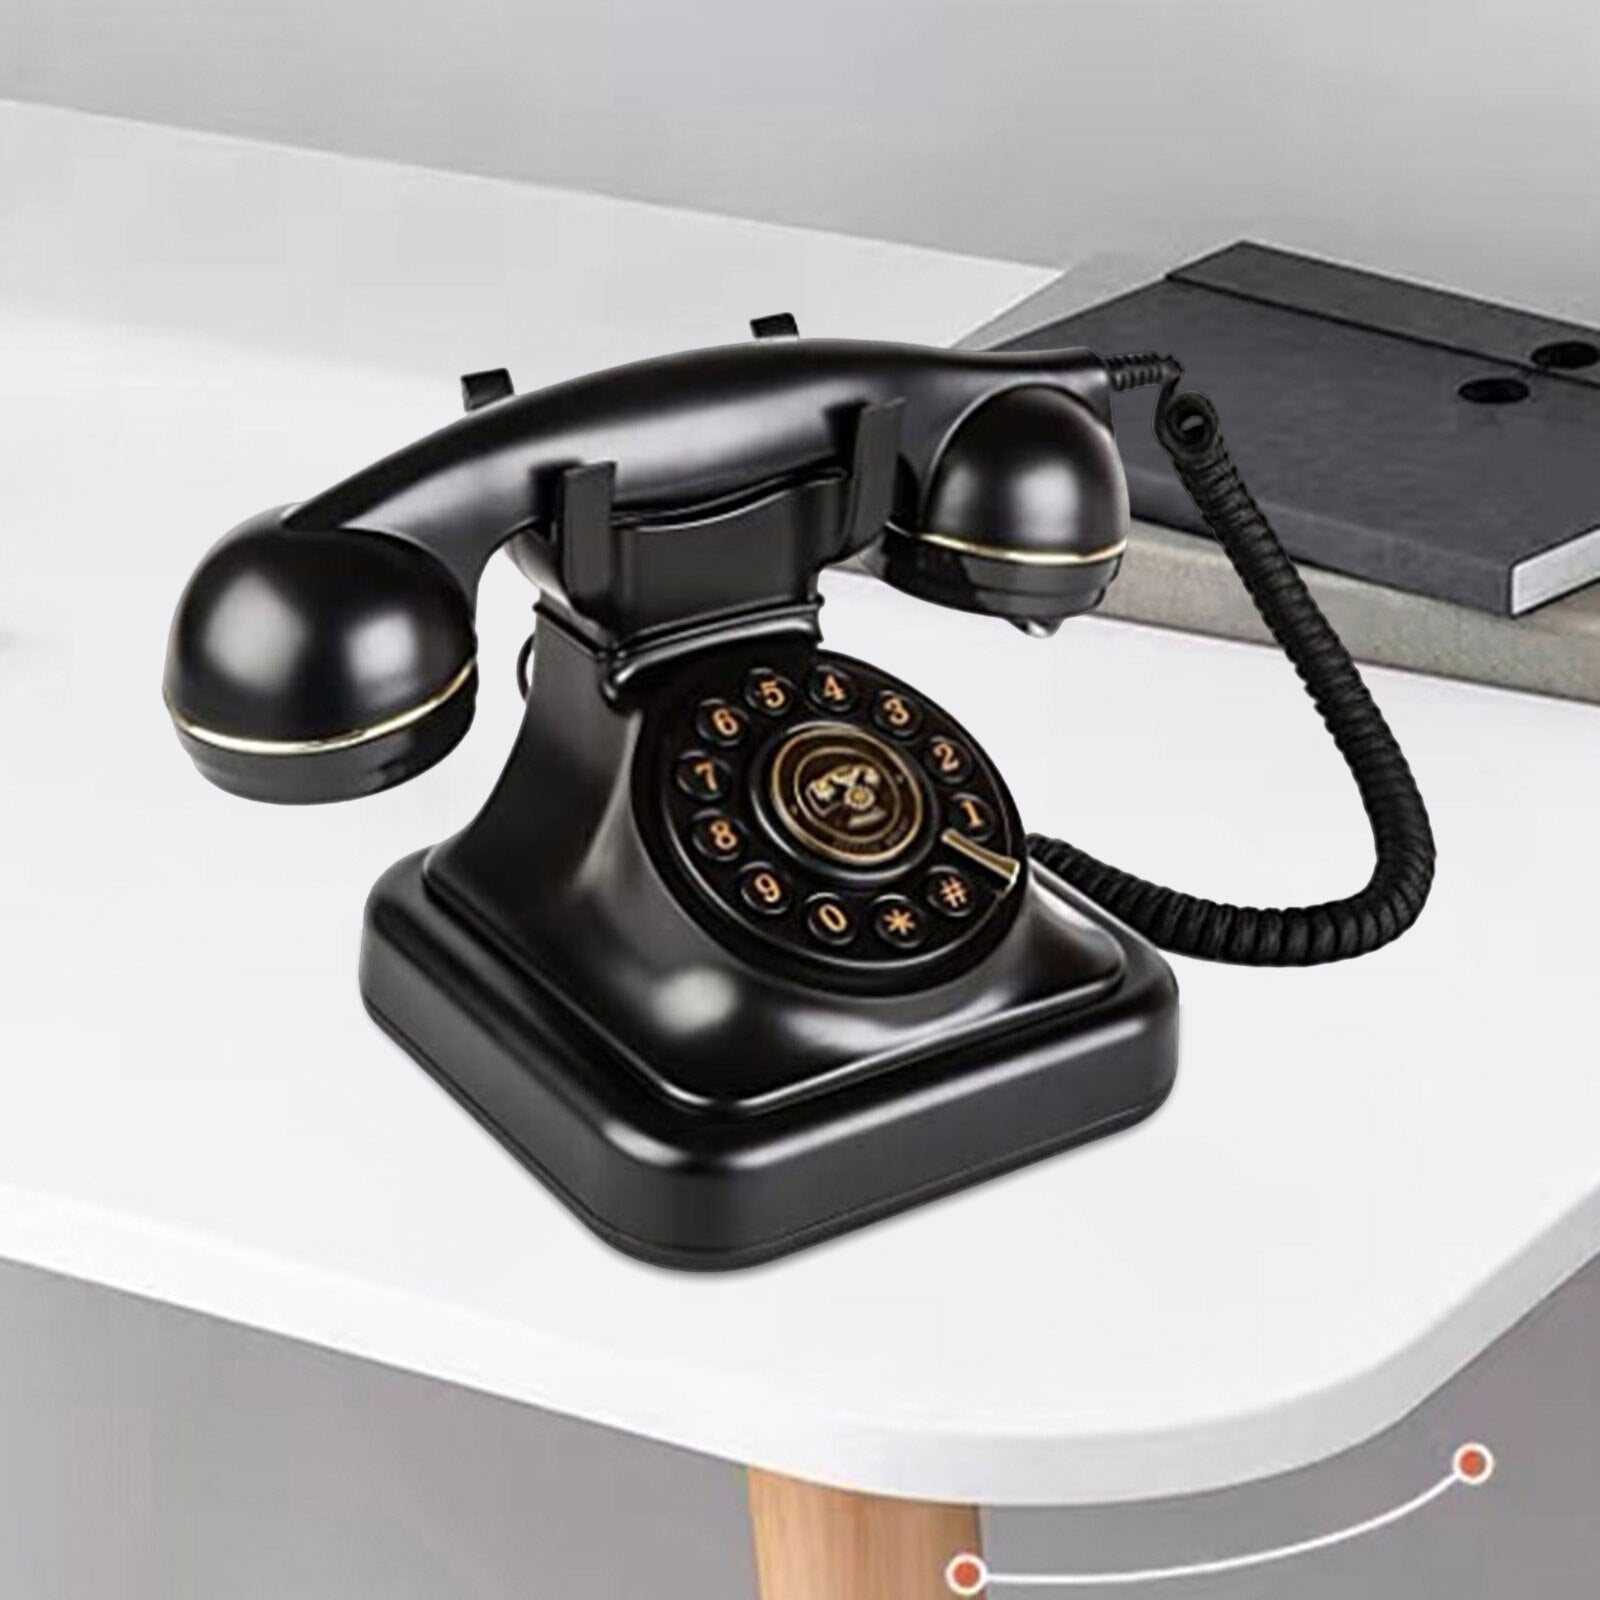 Corded Phone Old Fashioned Landline Phones Volume Adjustment Function with Mechanical Bell Button Dial for Home Decorations